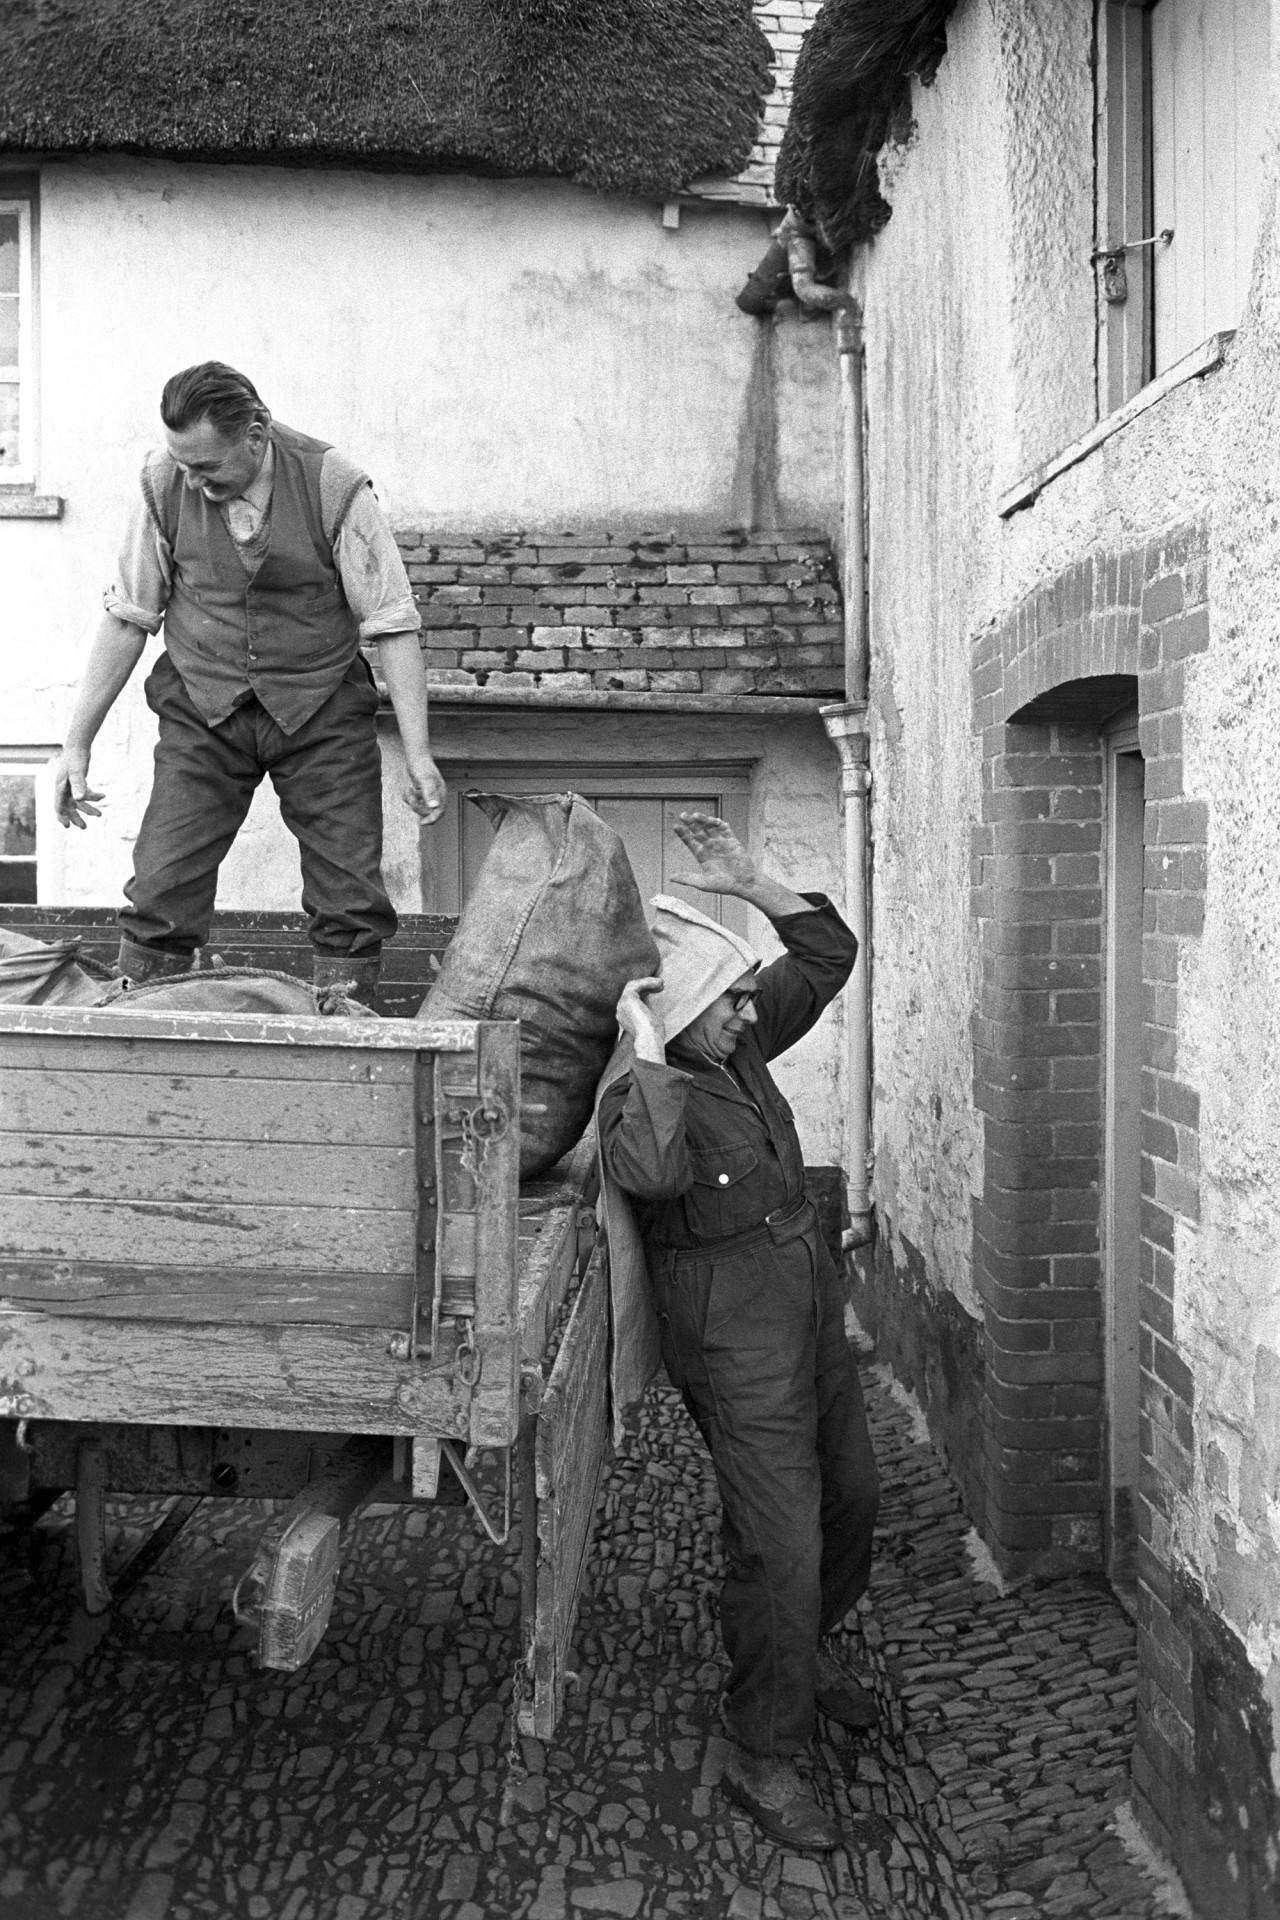 Delivering coal to farm.
[Two men from J Coal & Sons, coal merchants, unloading sacks of coal from a lorry and taking them into the farmhouse at Elliots, Roborough.]